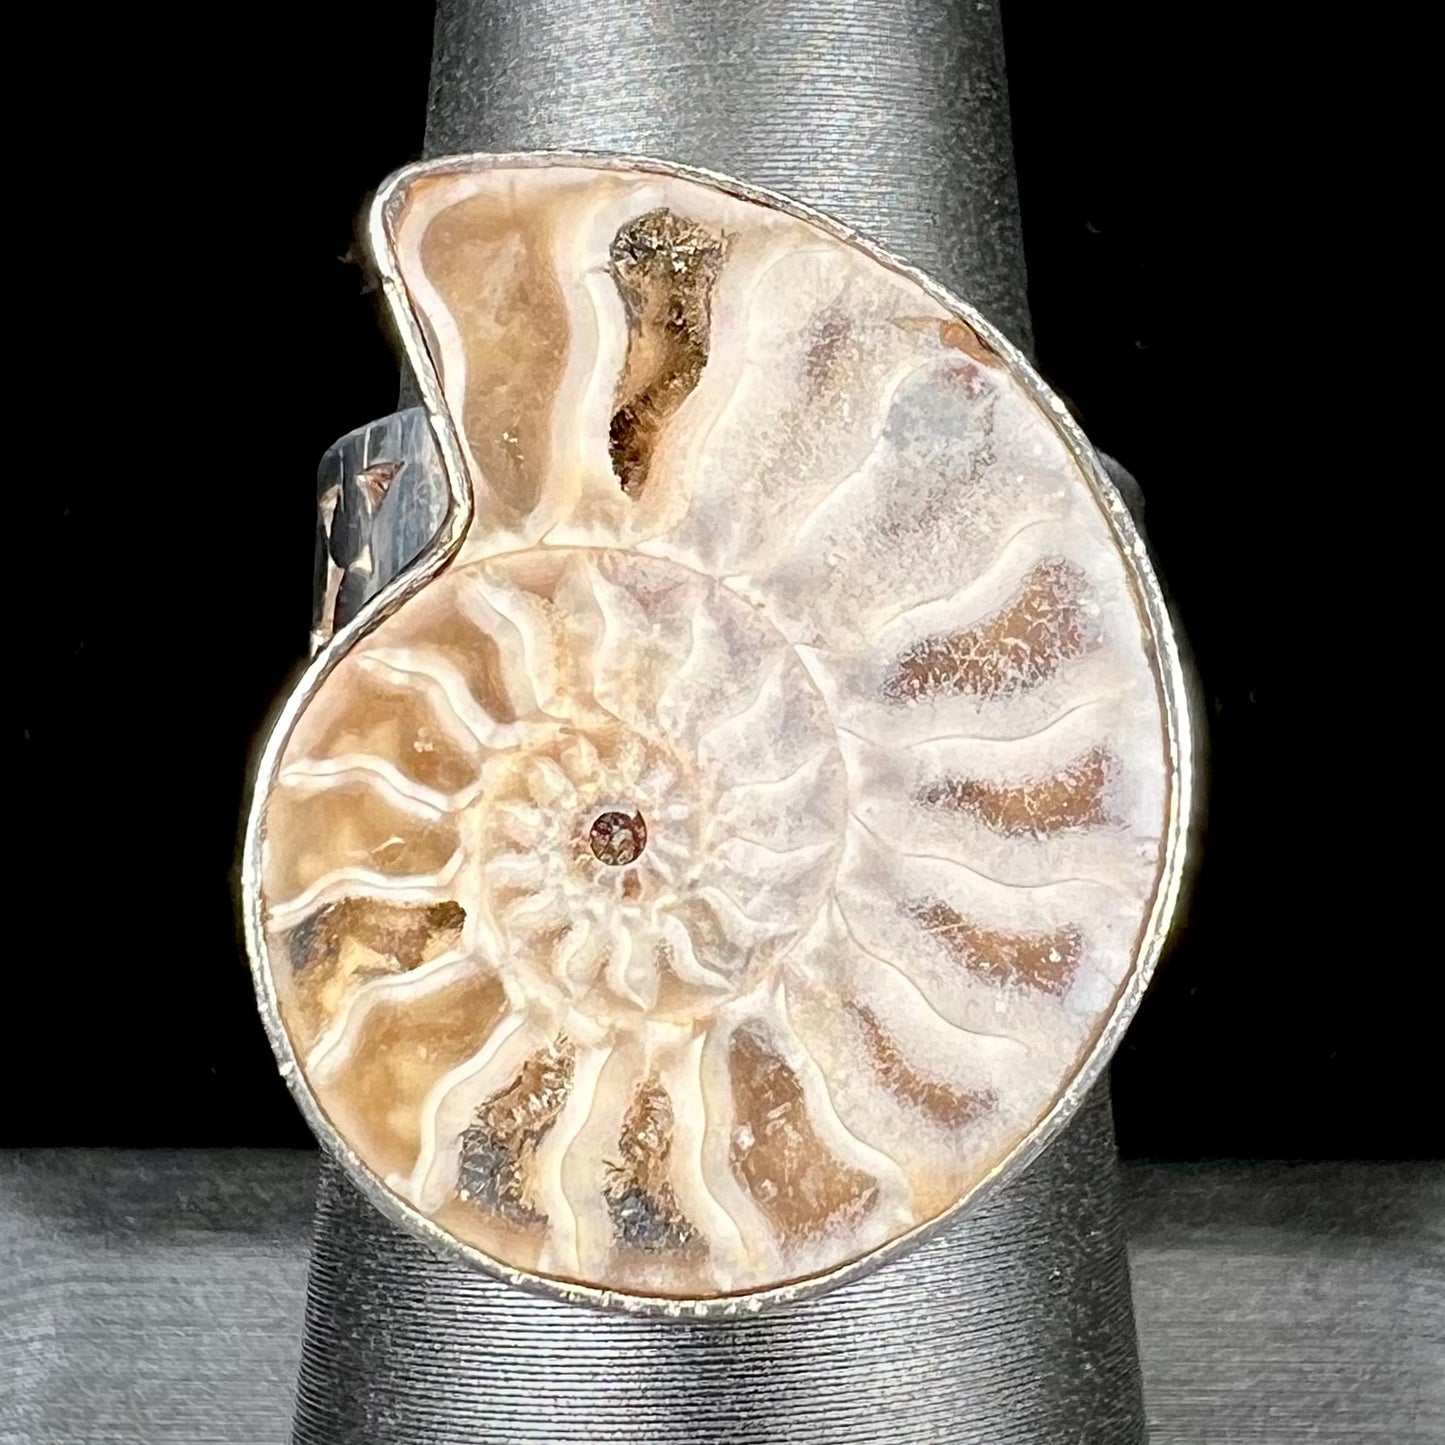 A unisex sterling silver ring bezel set with an ammonite shell fossil.